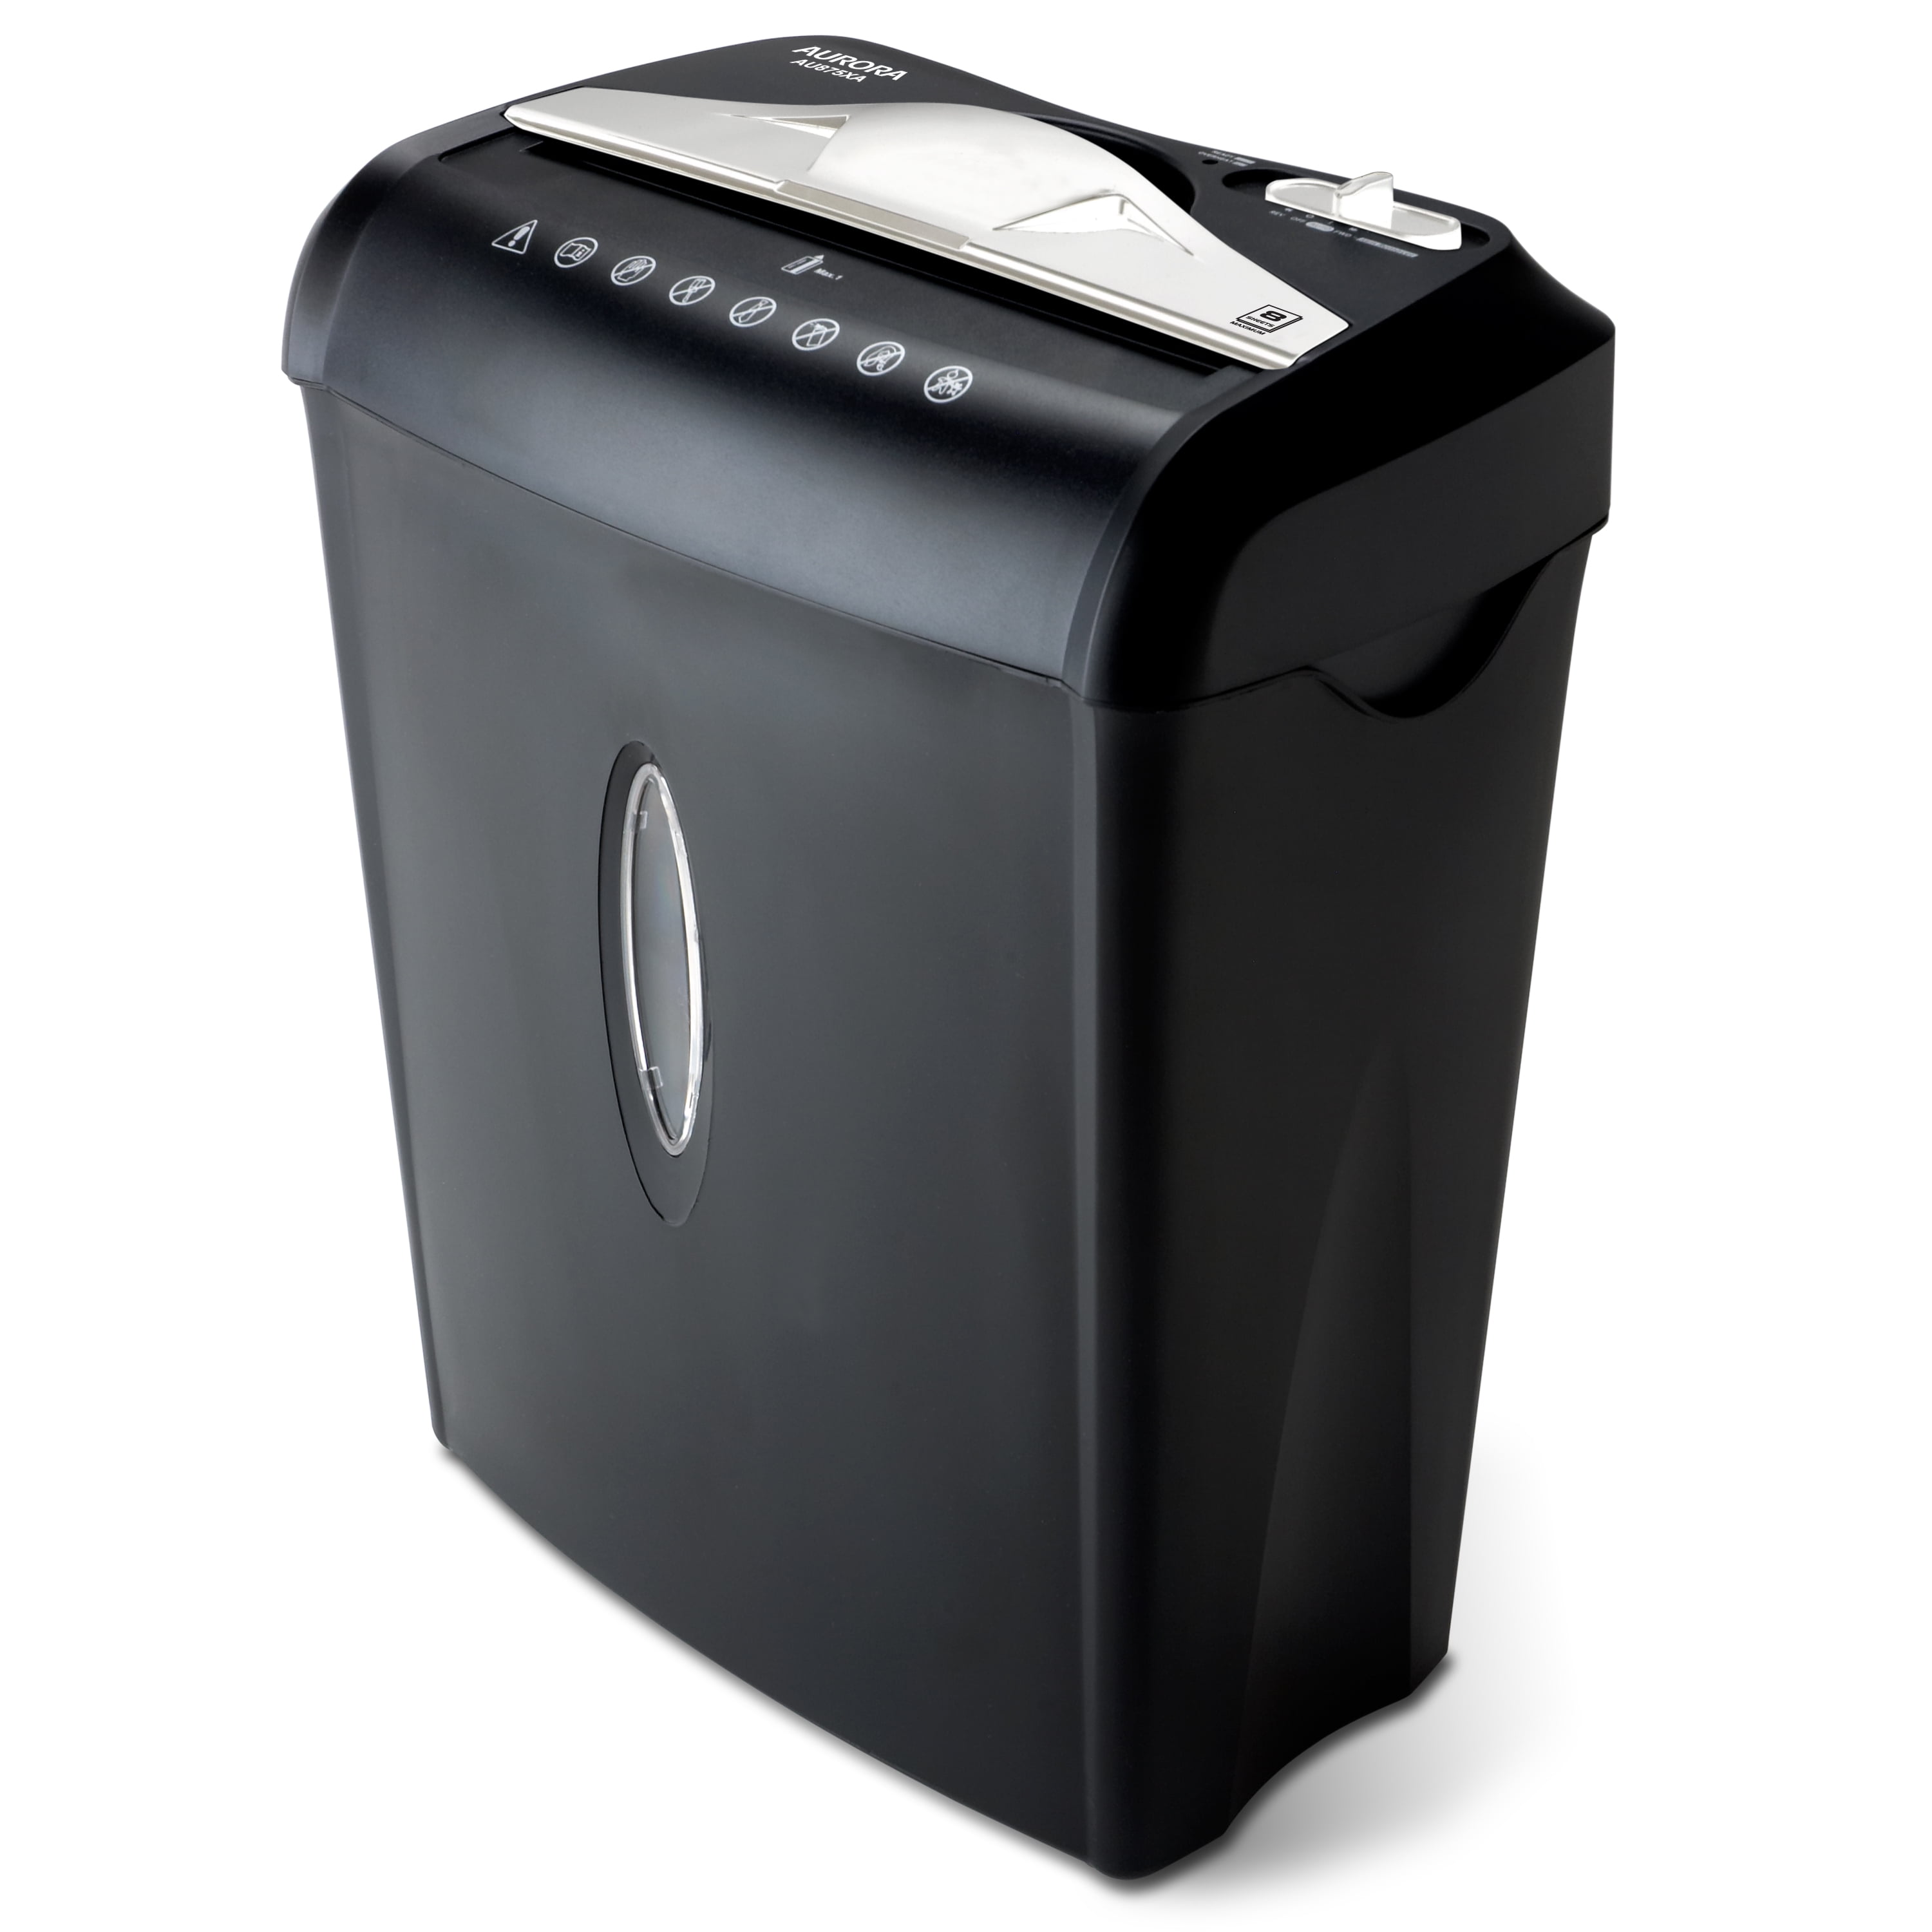 Security Level P4 Paper Clip and Credit Card Shredder for Home Use Staples 17 Litre Bin Fellowes Powershred LX50 9 Sheet Cross Cut Personal Shredder